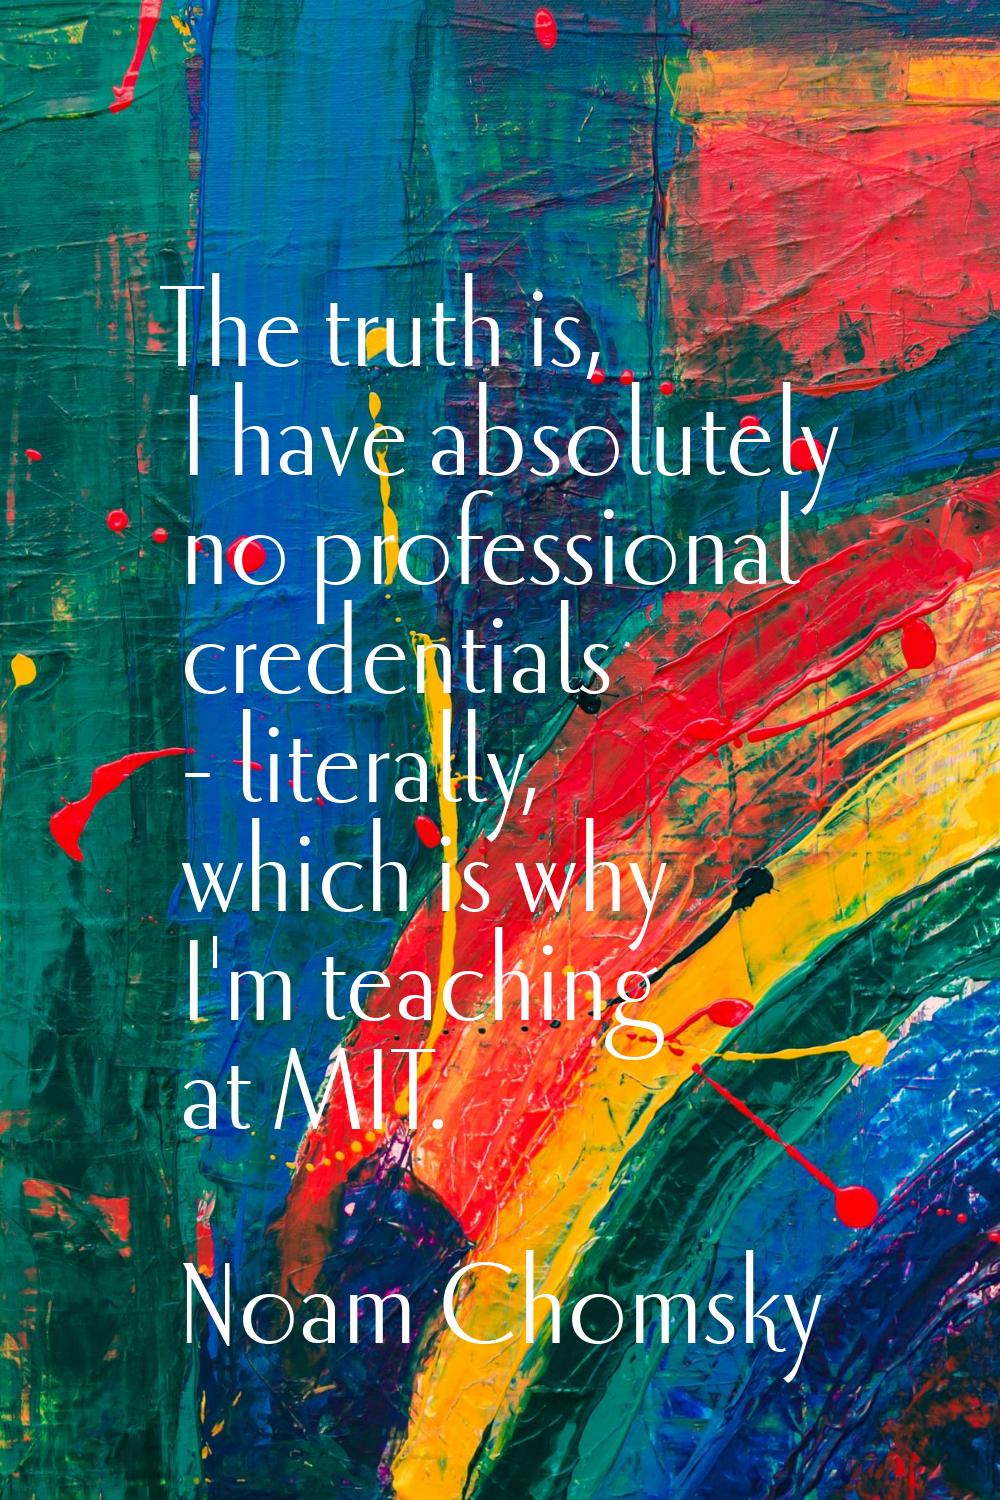 The truth is, I have absolutely no professional credentials - literally, which is why I'm teaching 